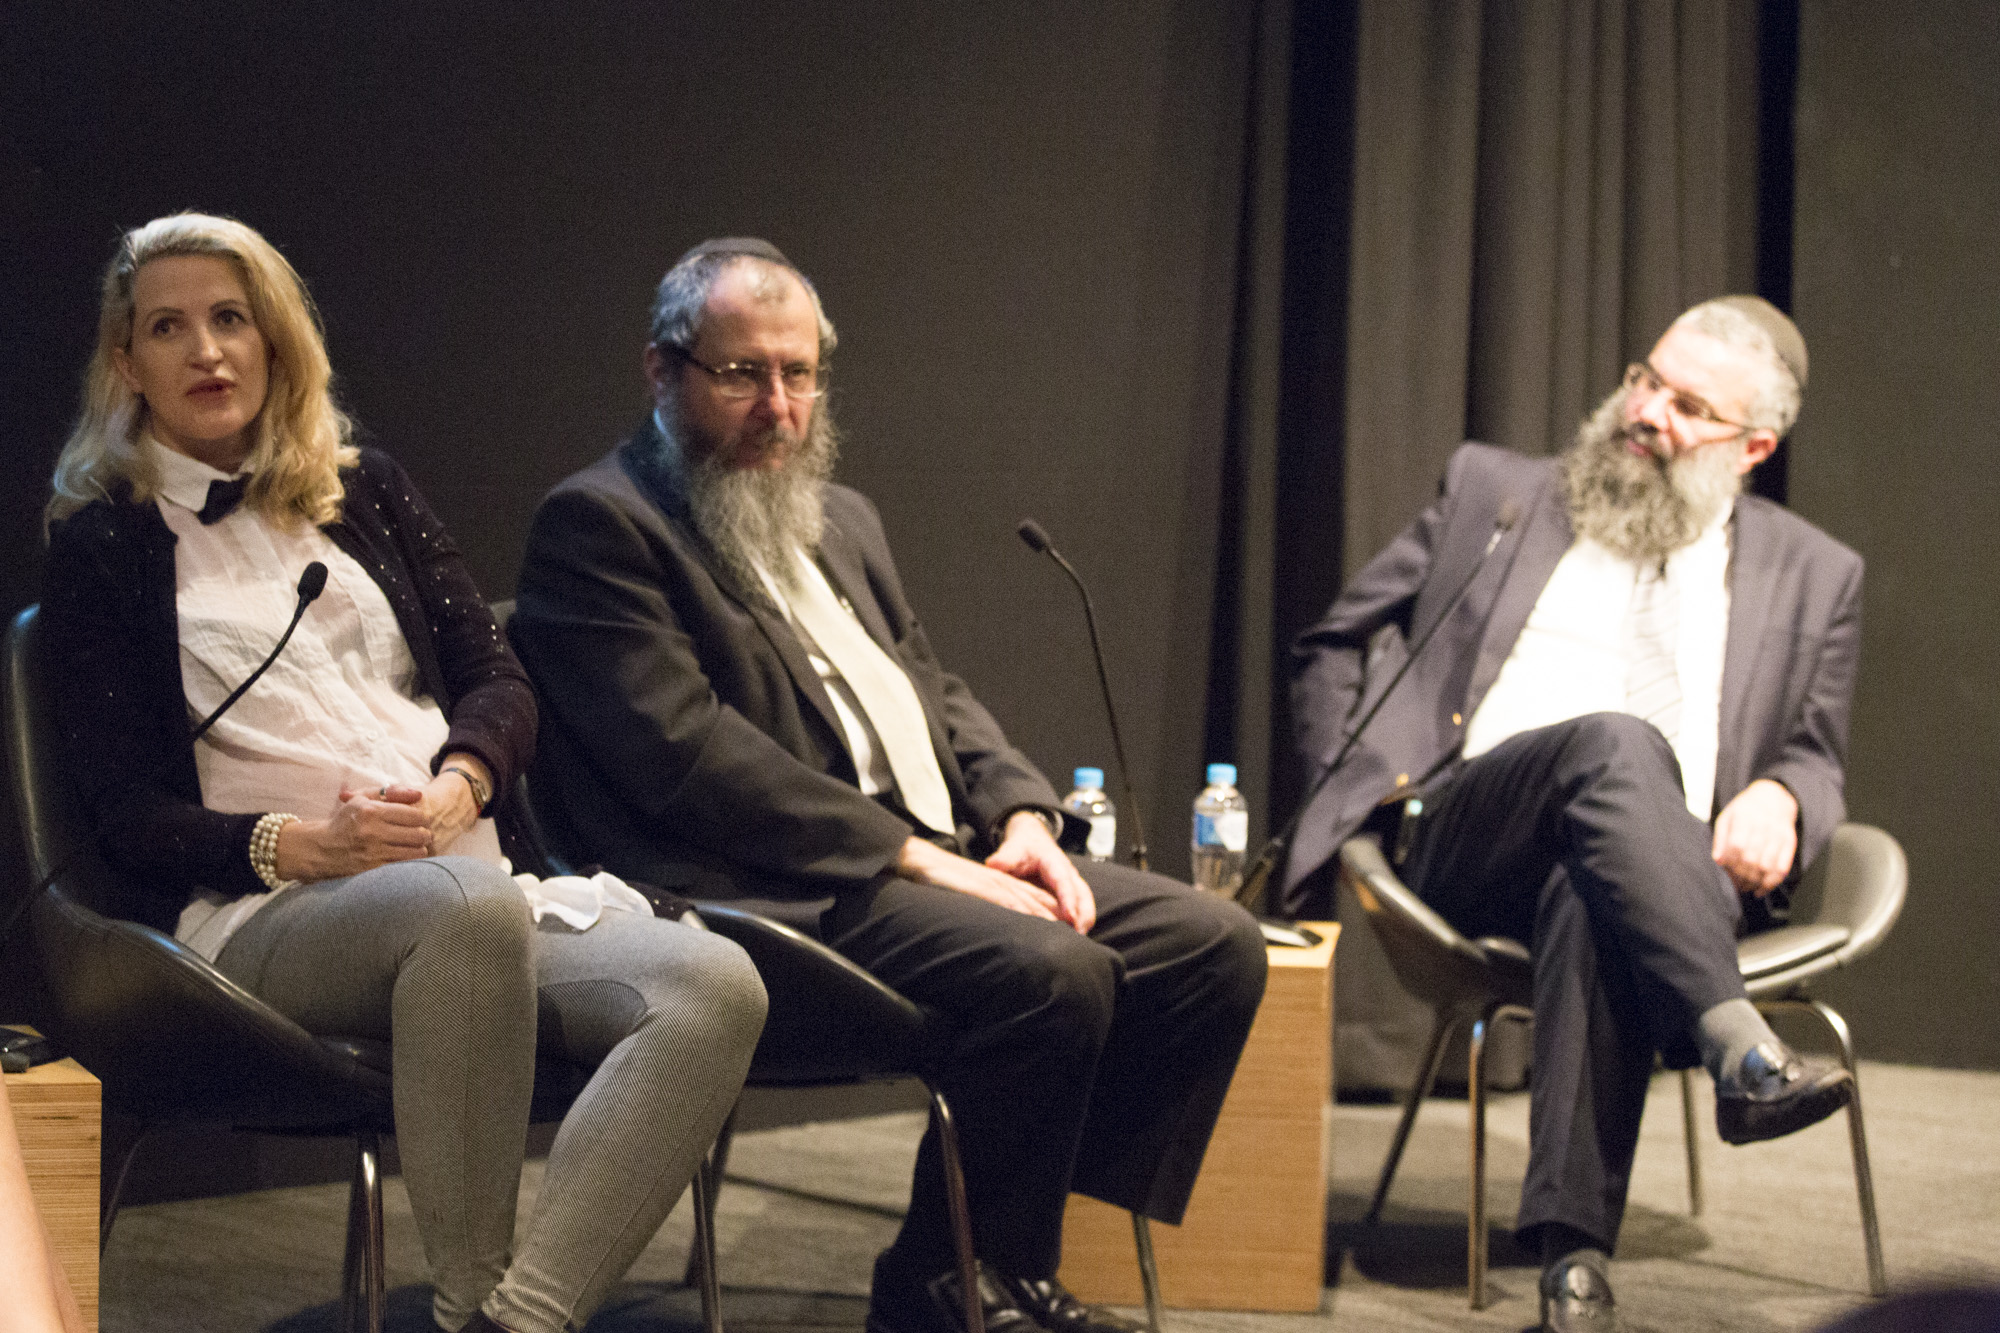 Photographer D-Mo Zajac in conversation with Rabbis Gourarie and Slavin, 10 March 2016, photograph by Joy Lai